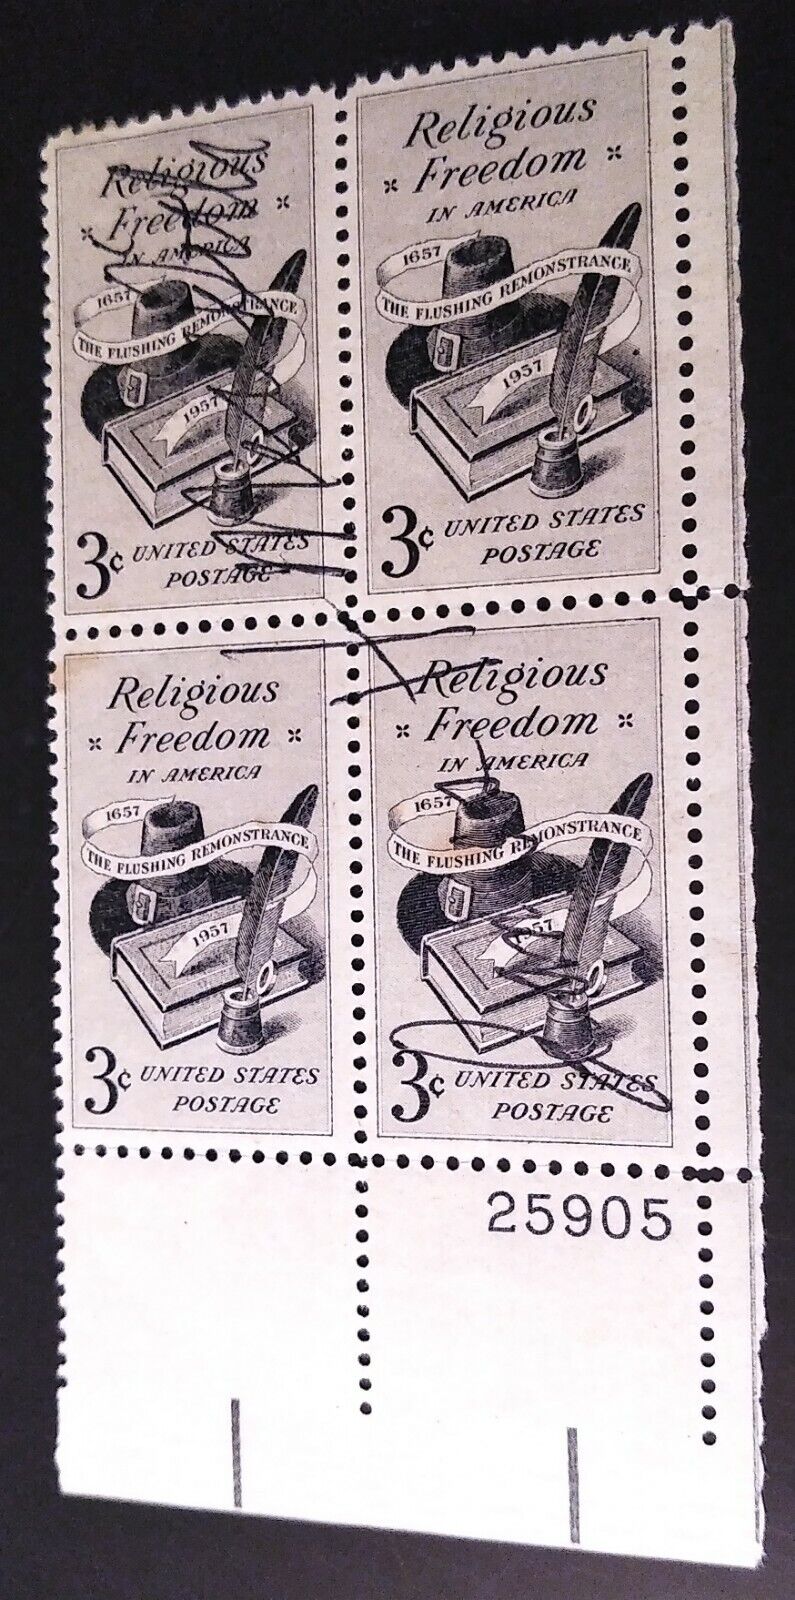 RARE RELIGIOUS FREEDOM IN AMERICA STAMP SIGNED BY JAMES H MEREDITH. LIFETIME COA